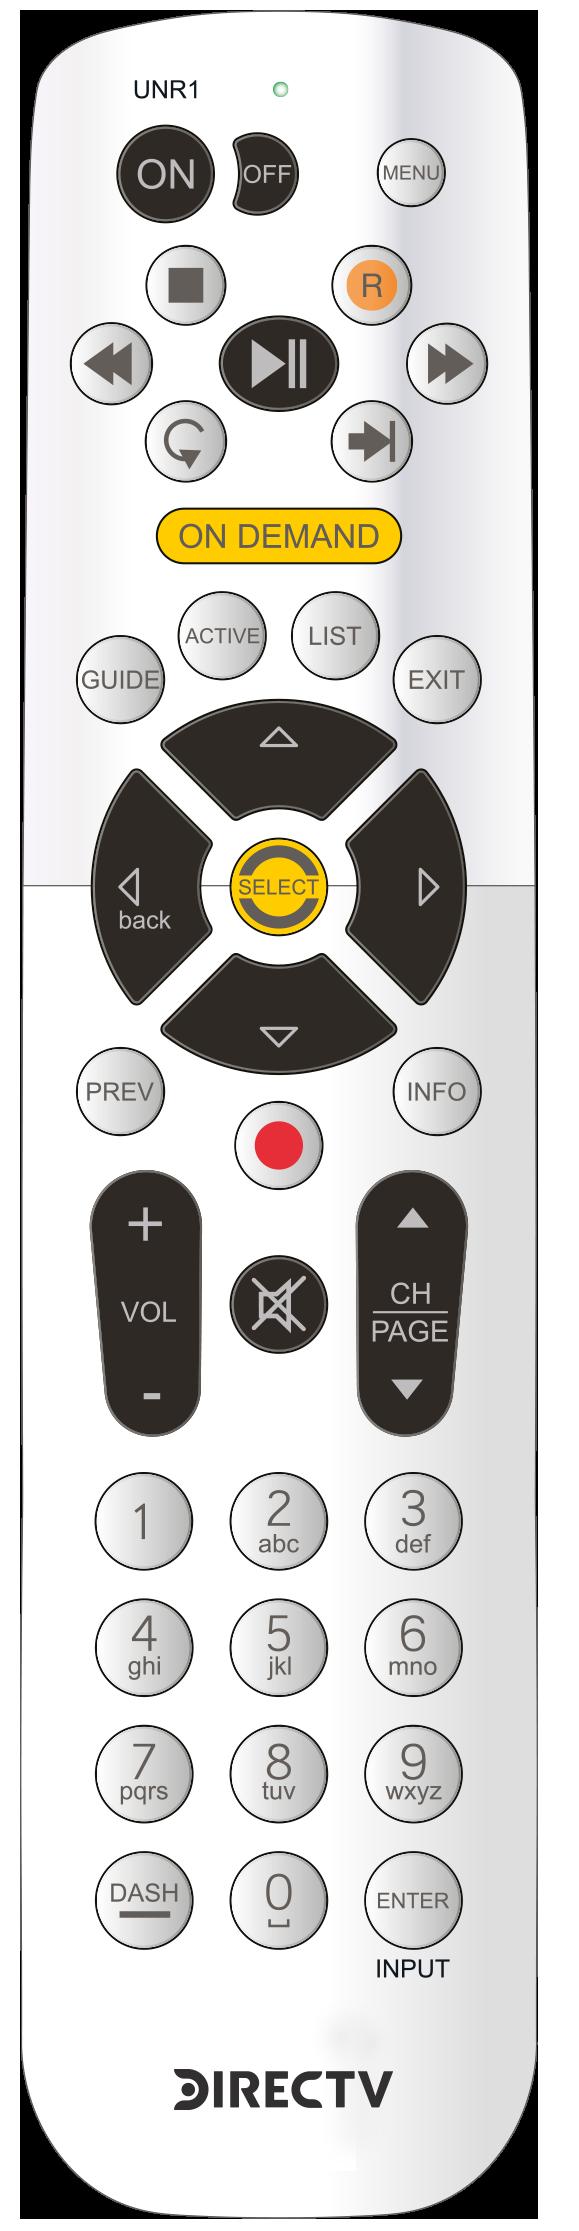 GETTING FAMILIAR WITH YOUR REMOTE CONTROL NAVIGATION CONTROLS POWER Turns on and off selected devices and the TV GUIDE button once for the Program Guide.